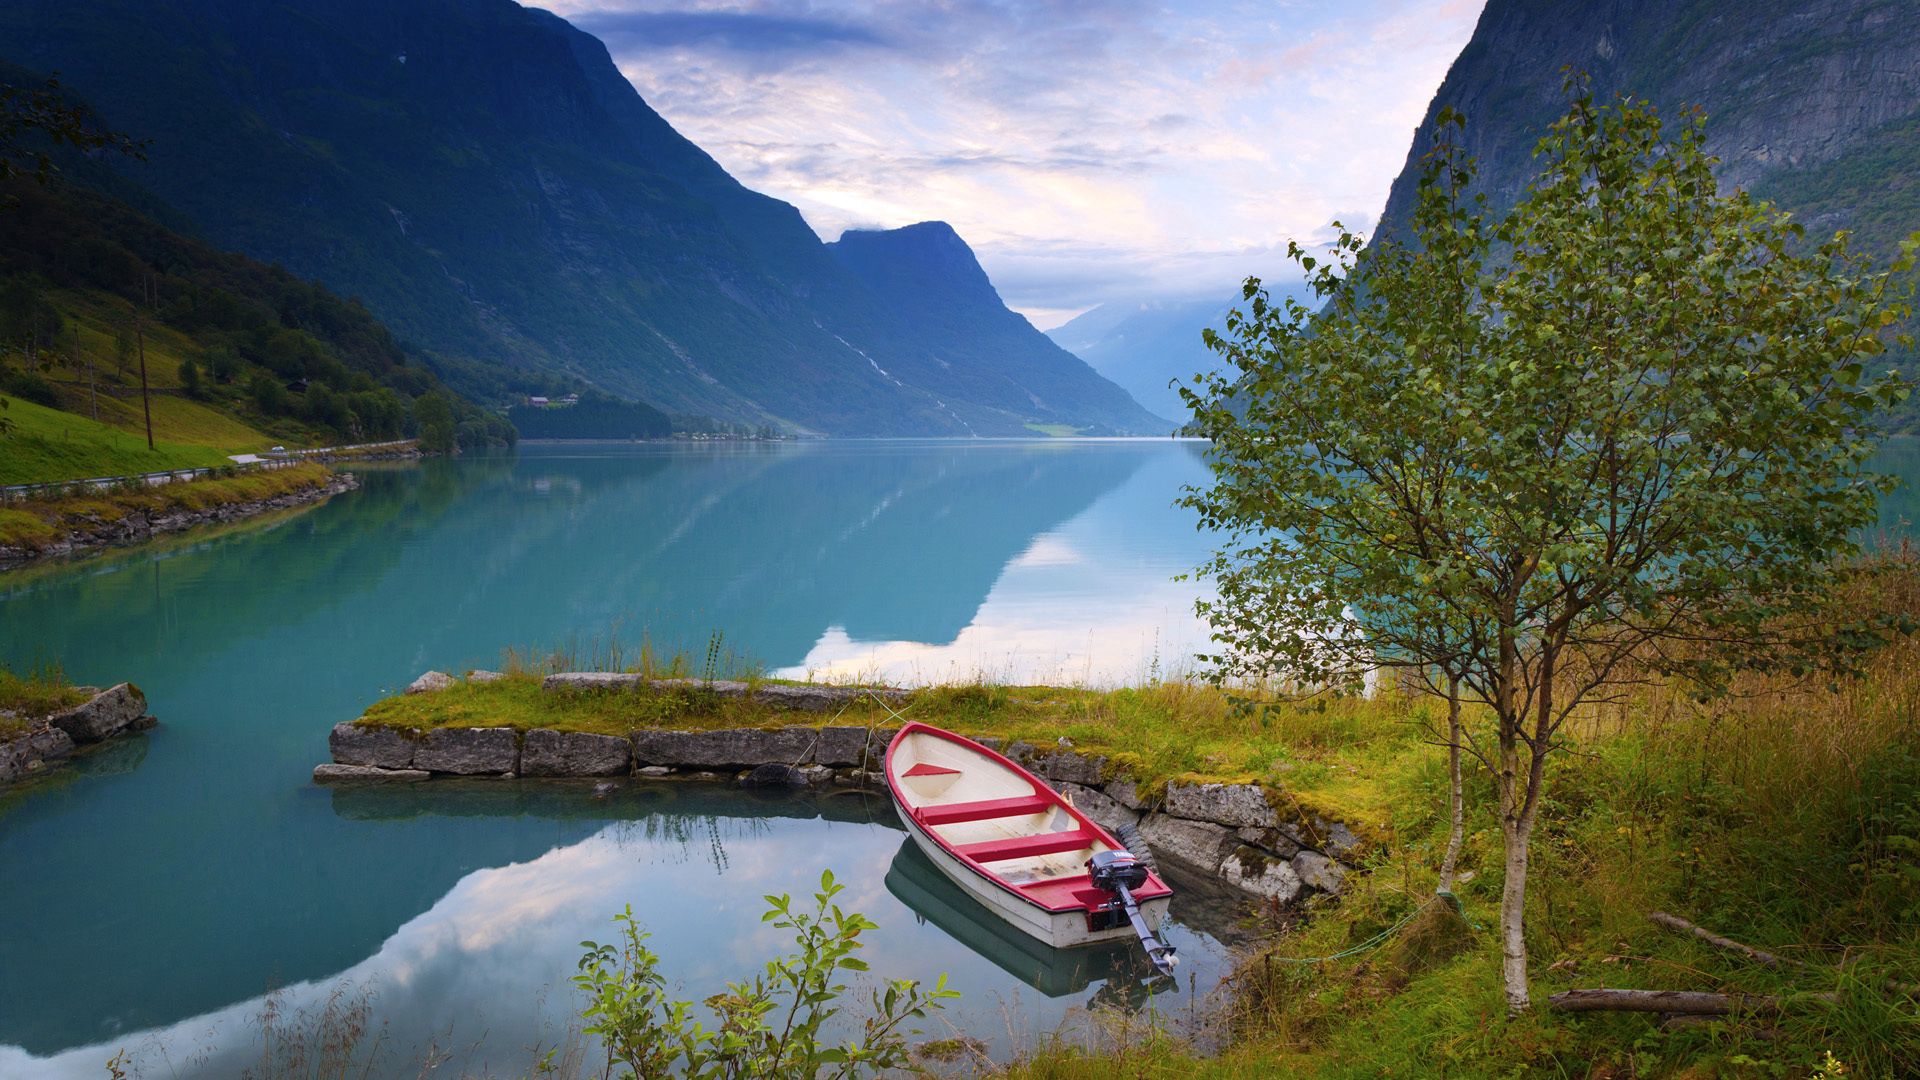 norway, lake, nature, grass, stones, mountains, shore, bank, boat, blue water